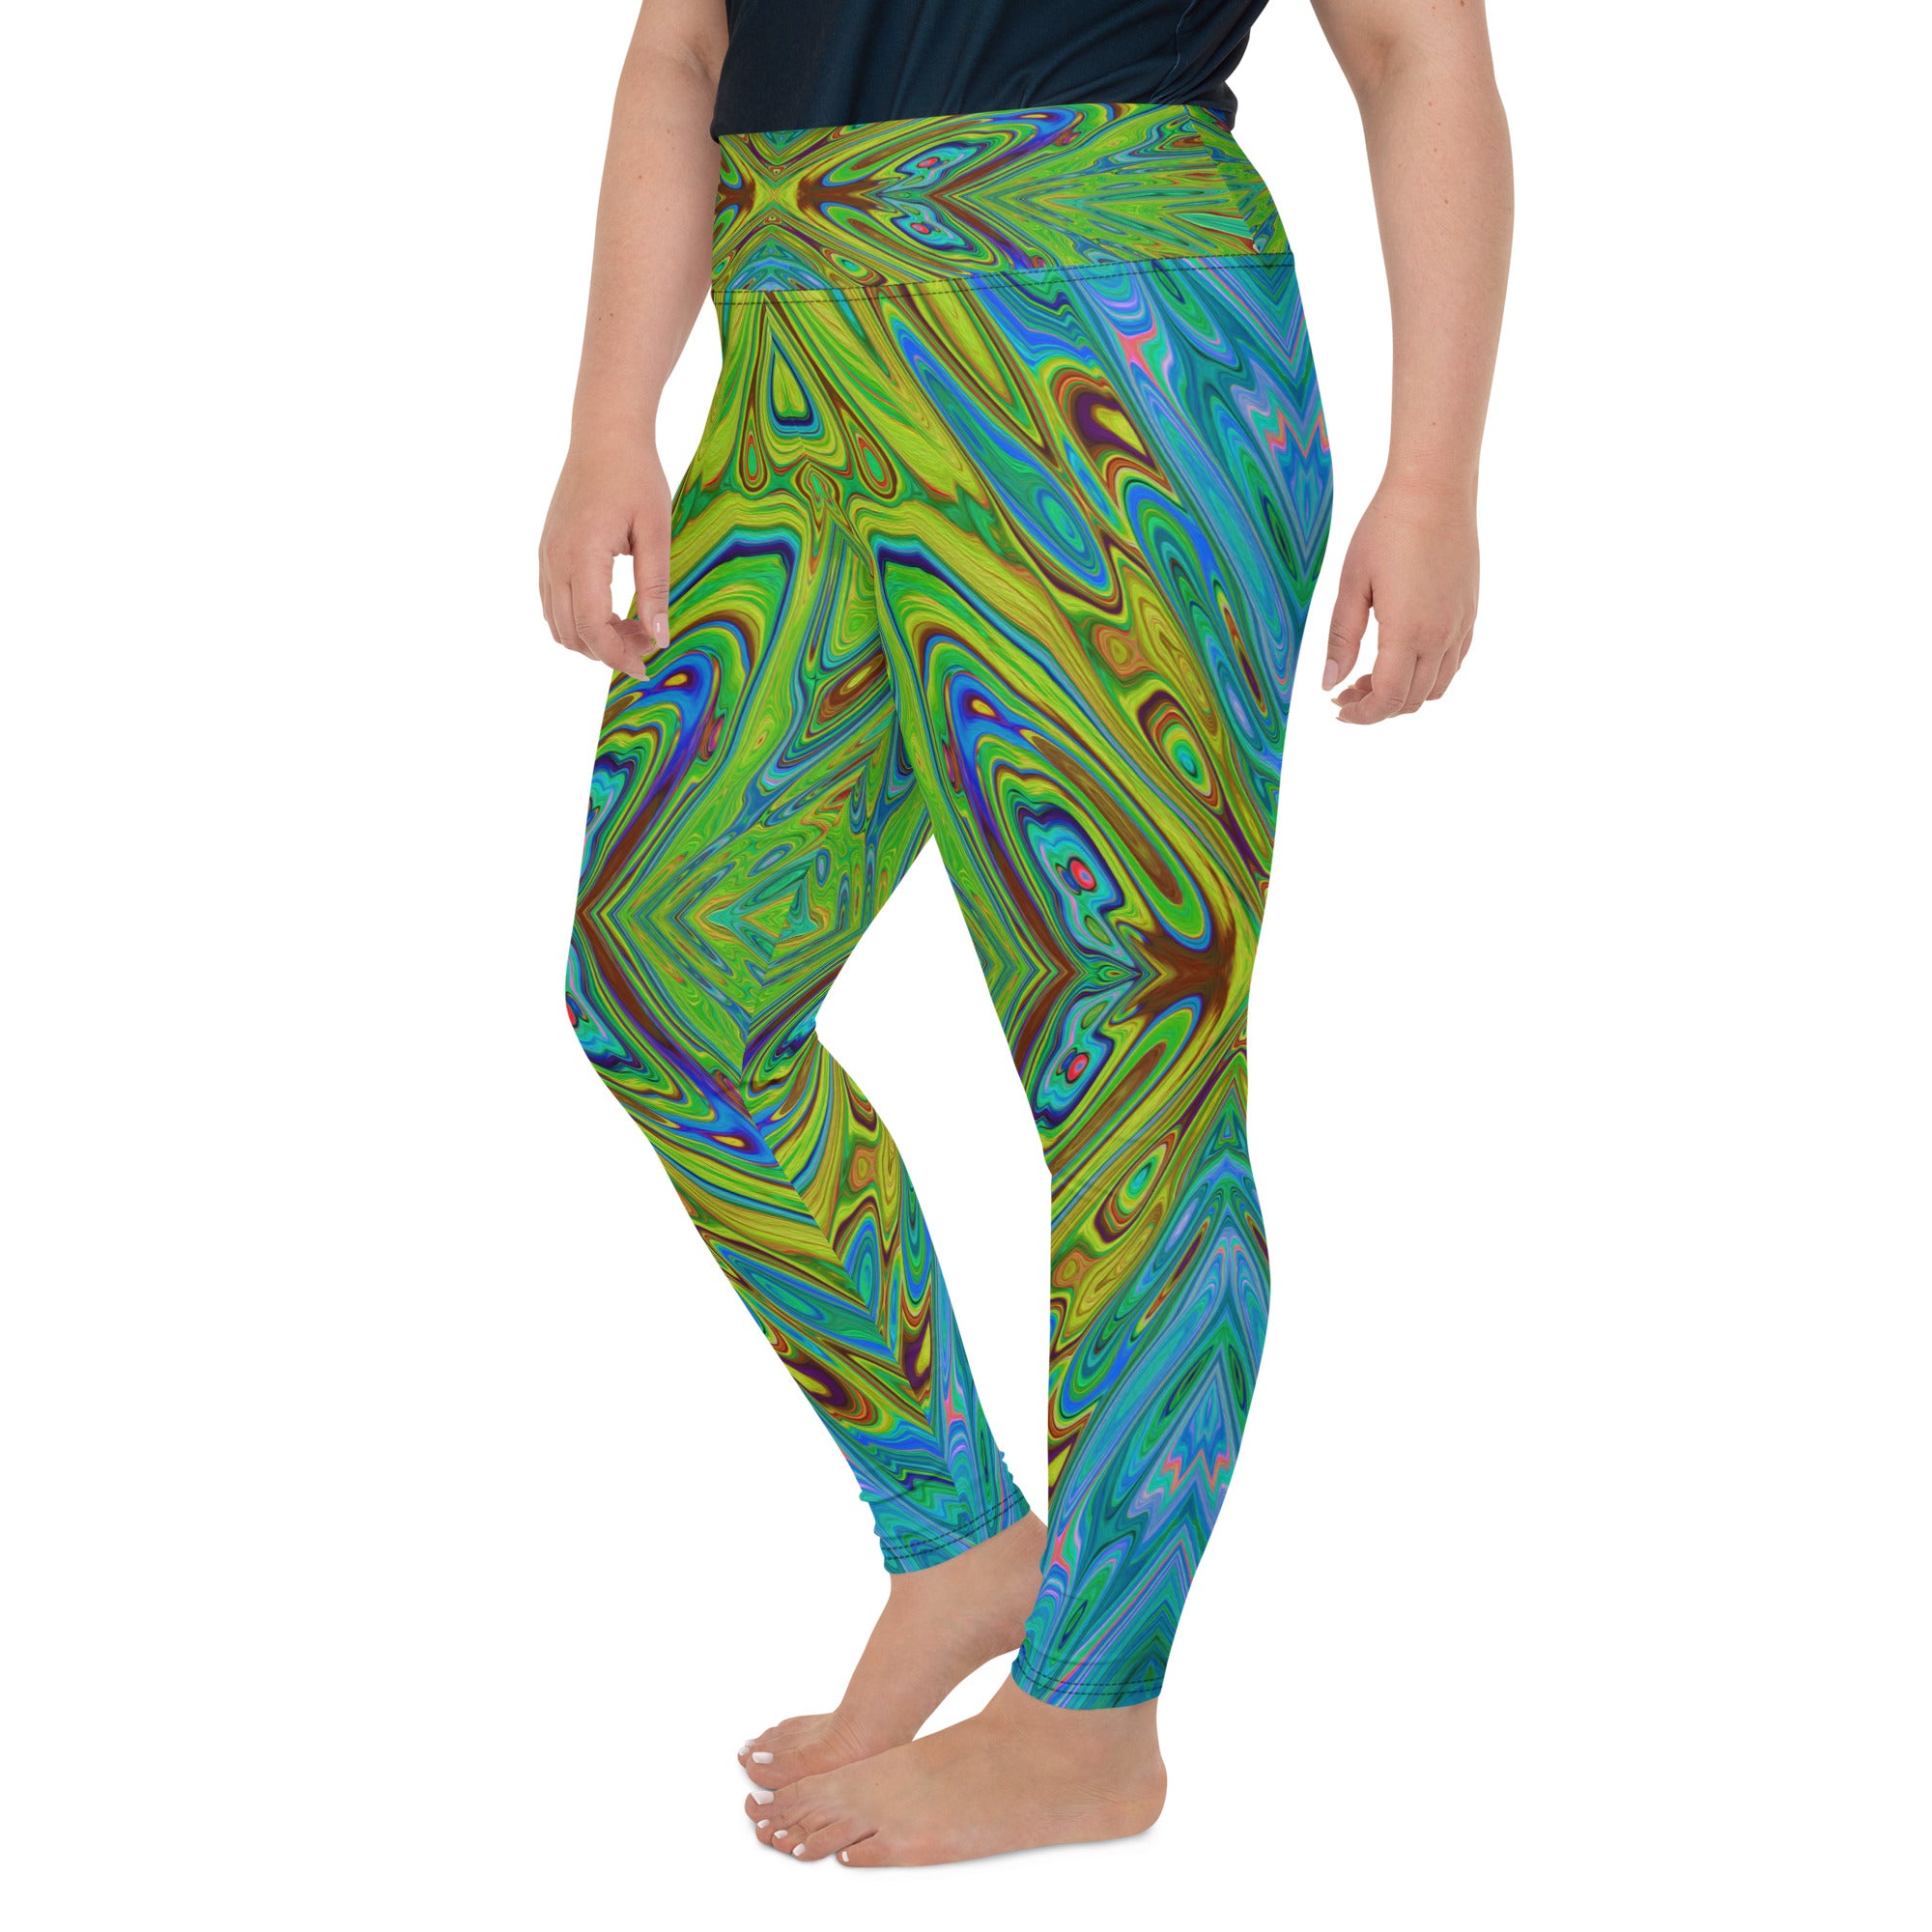 Plus Size Leggings, Trippy Chartreuse and Blue Abstract Butterfly